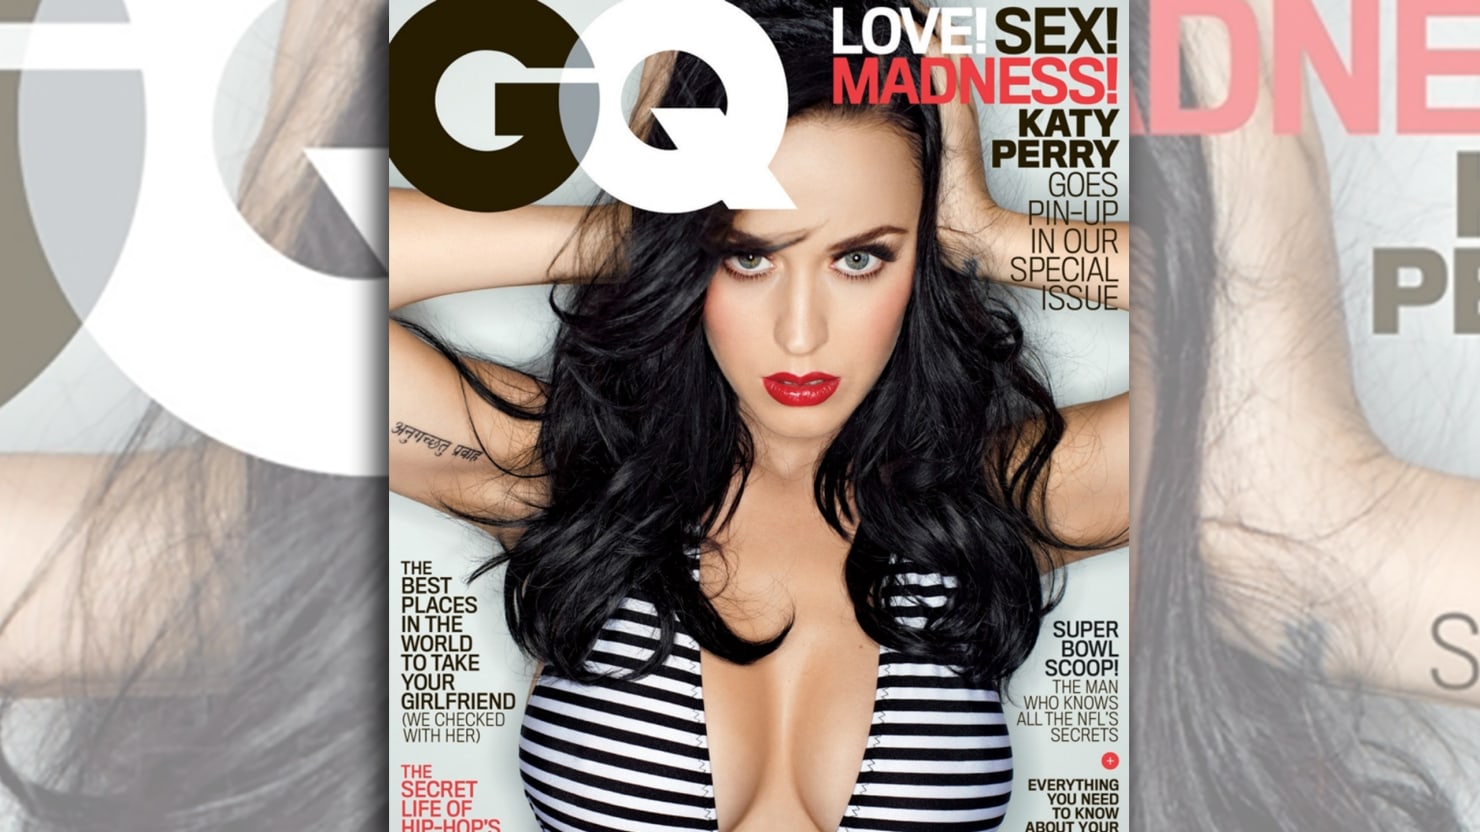 Katy Perry Porn For Real - Katy Perry Lost Her Virginity in a Volvo